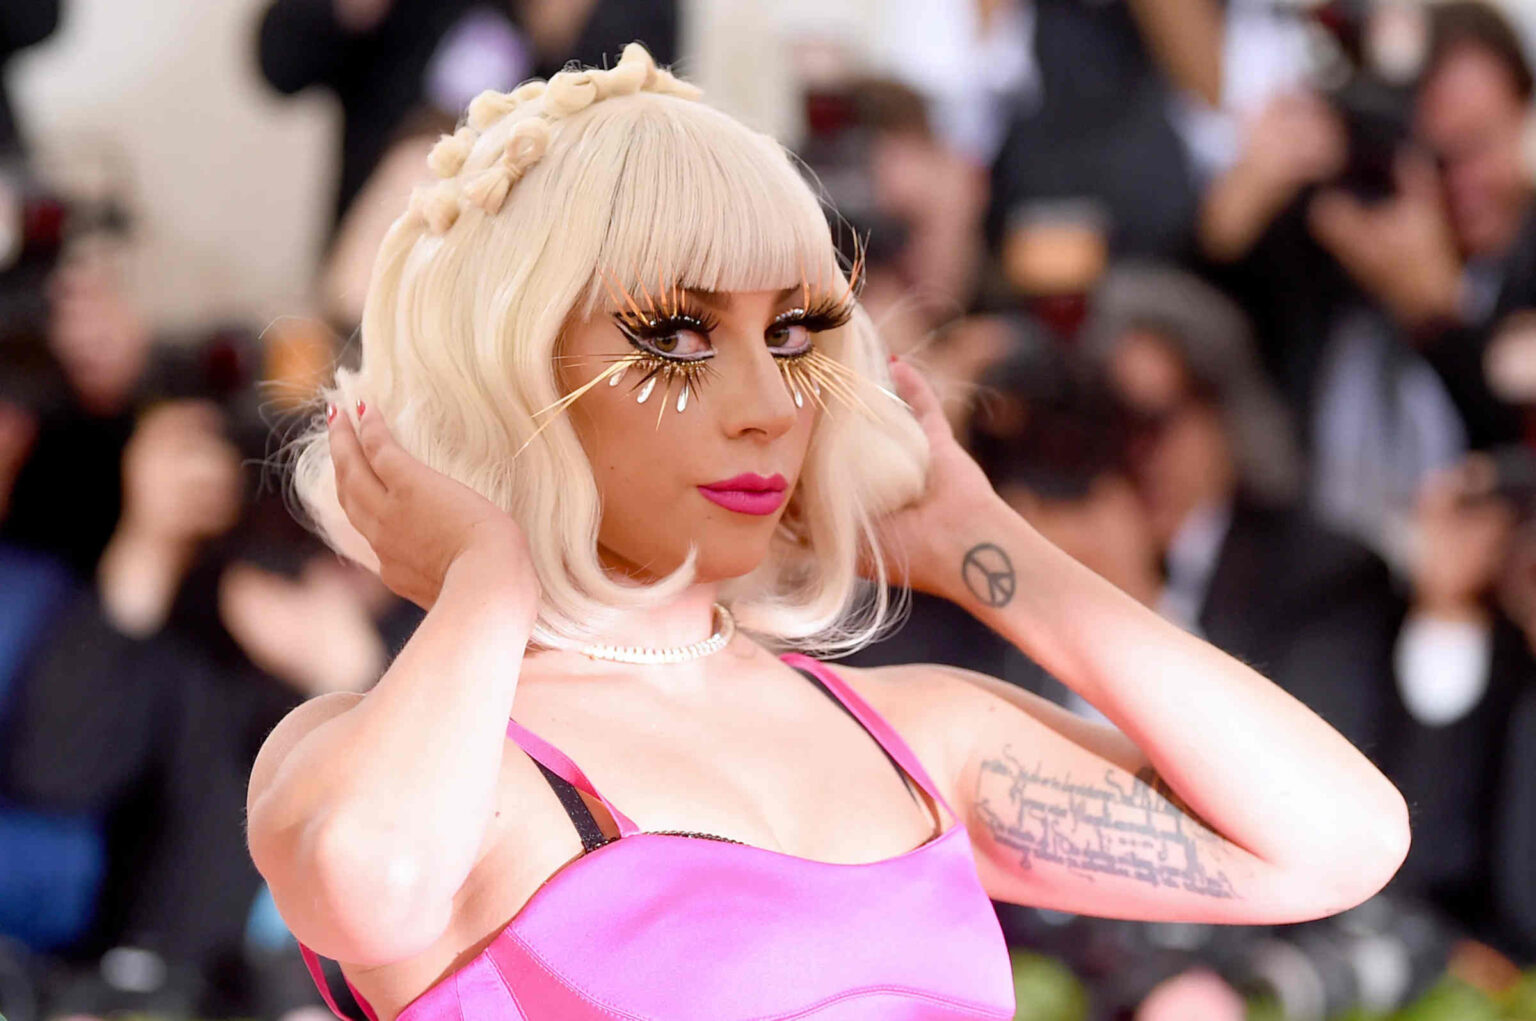 Will she continue to surprise and inspire us in her inimitable Gaga way? Look at the newest nude details surrounding Lady Gaga's mental health scare.